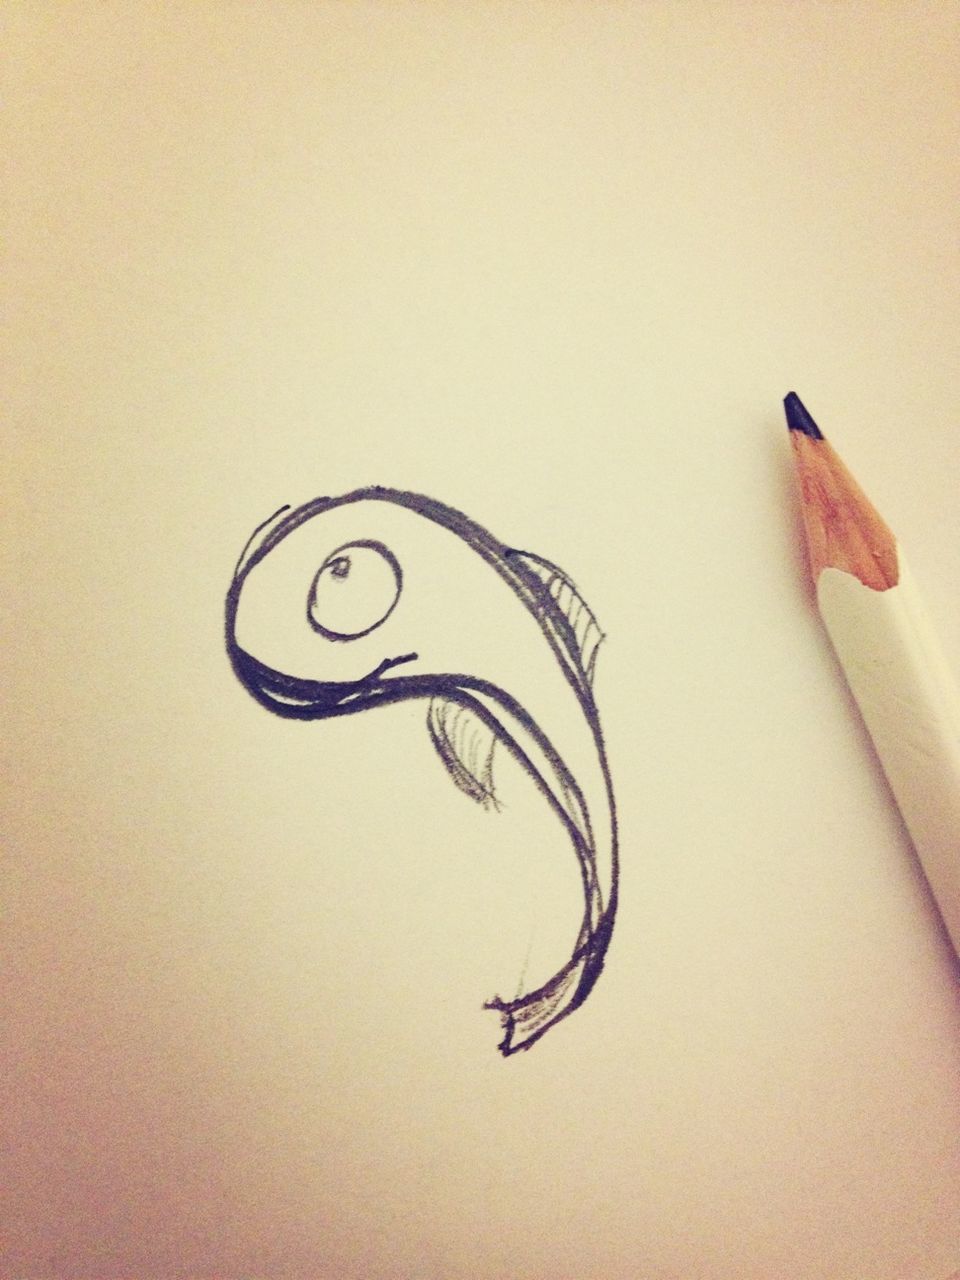 Pencil by drawing of fish on white surface